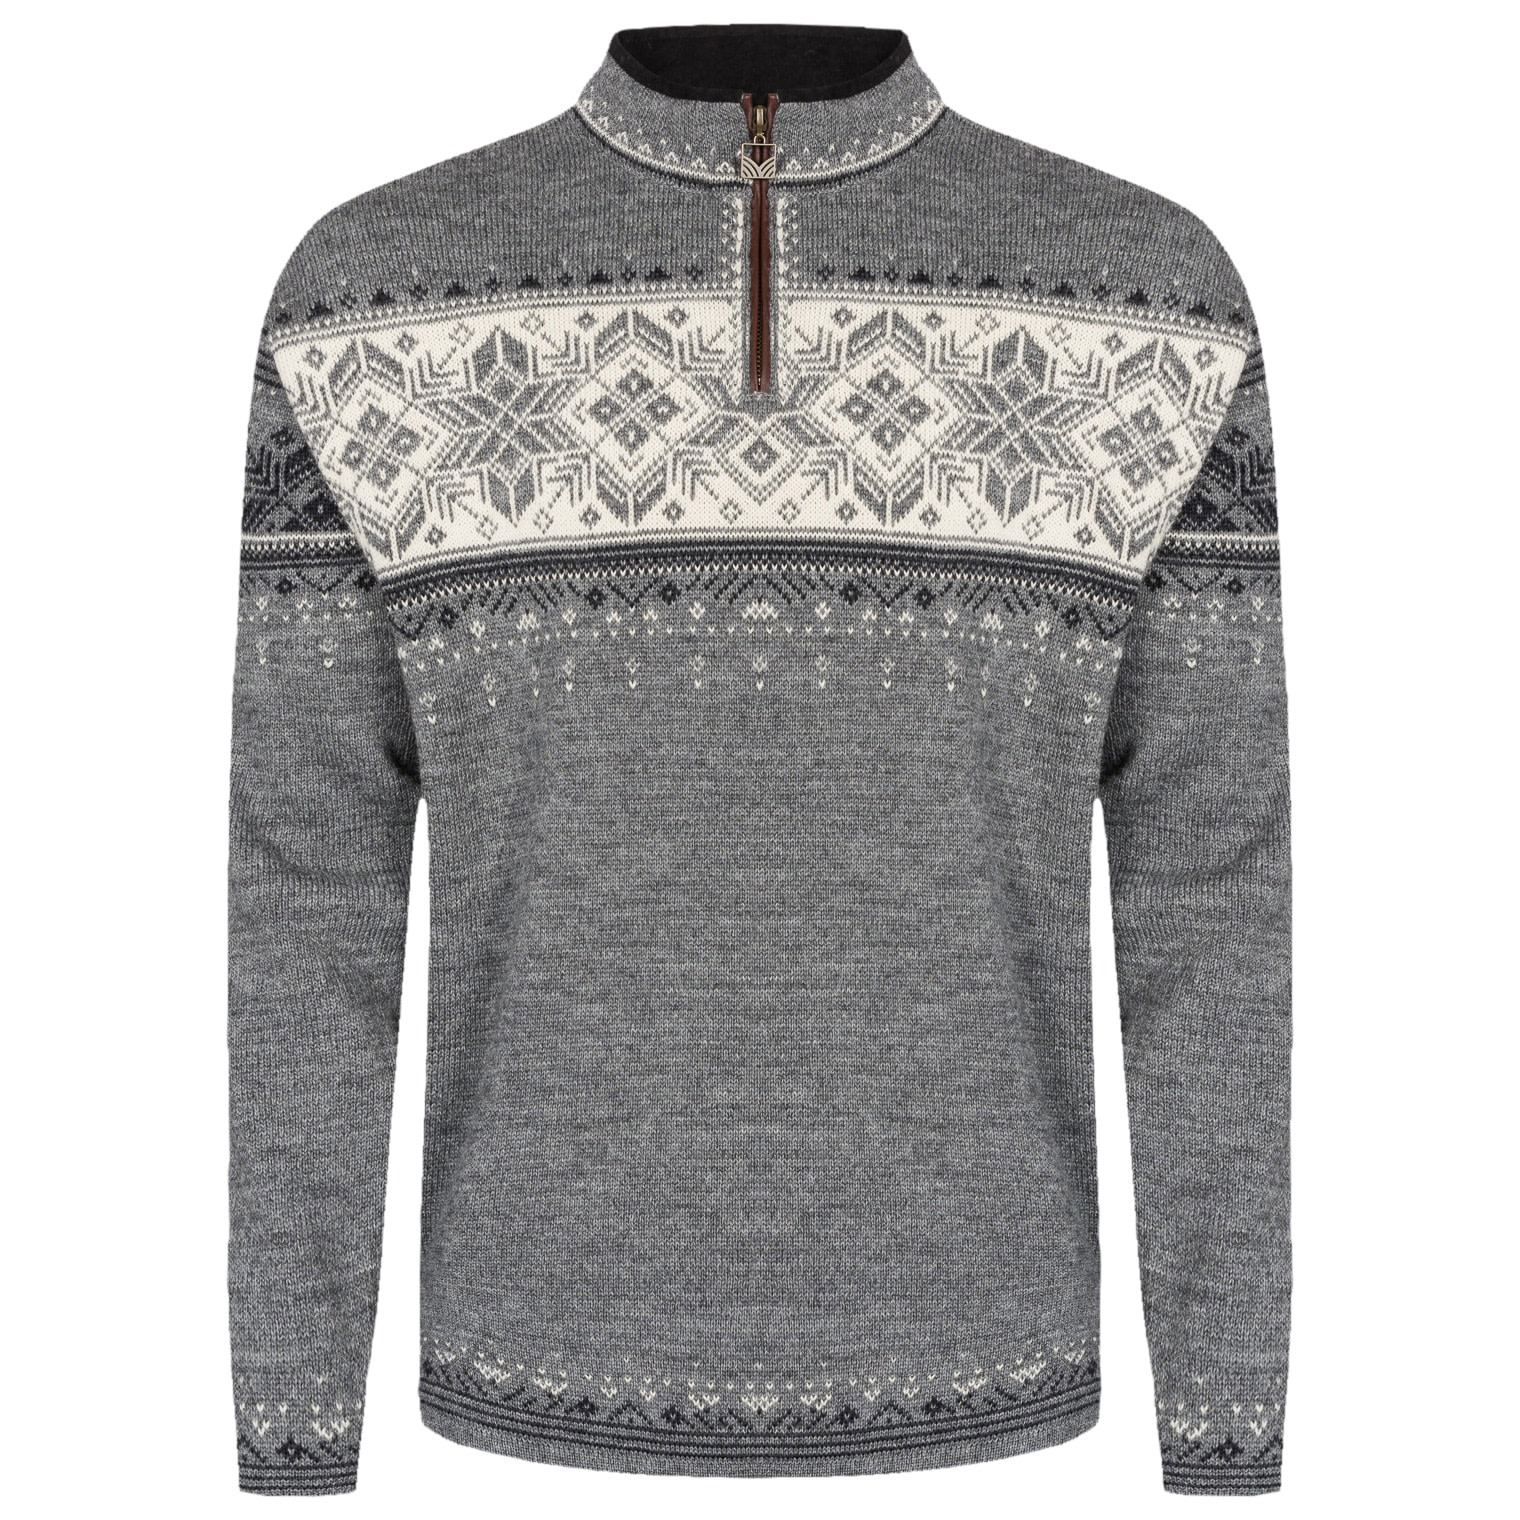 Dale of Norway Dale of Norway Men's Blyfjell Knit Sweater Smoke Drkcharc Offwhite Lgtcha S, Smoke DrkCharc OffWhite LgtCha